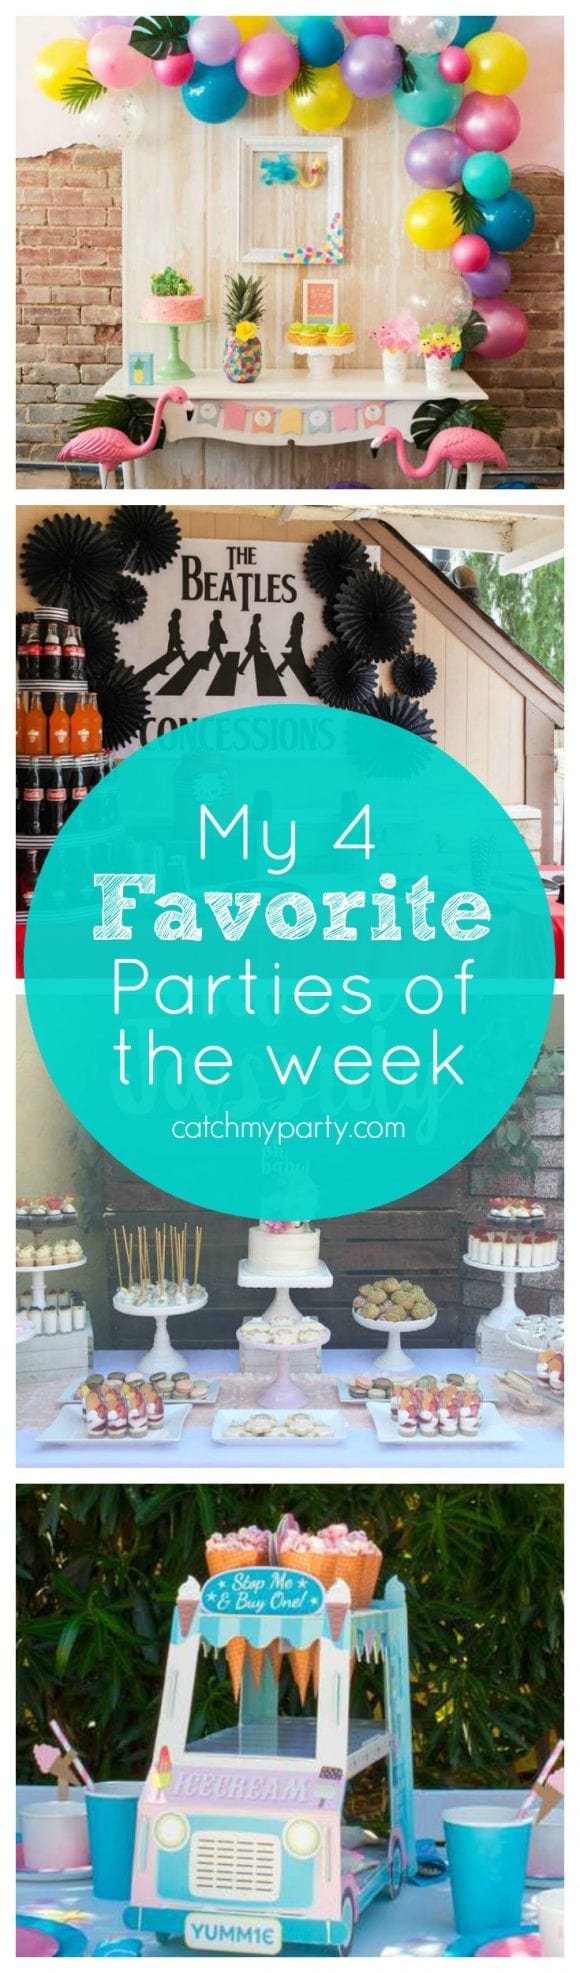 My favorite parties are a flamingo and pineapple party, a Beatles Bash first birthday party, a Boho baby shower and an Ice cream Party party | Catchmyparty.com